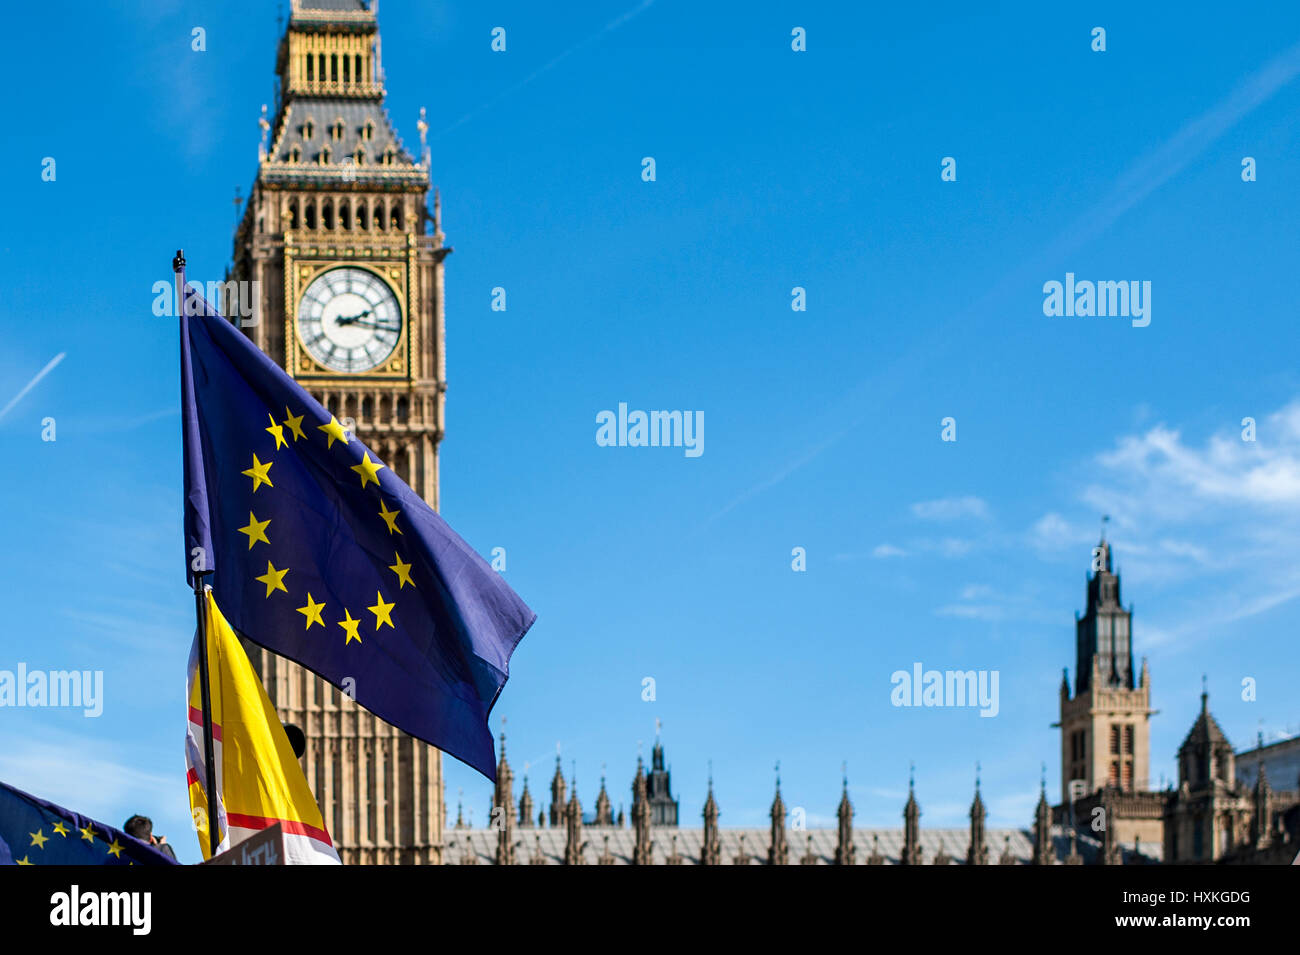 Eu flag with Big Ben in the Background. Image is taken during the March for Europe in London on the 26th March 2017. Stock Photo